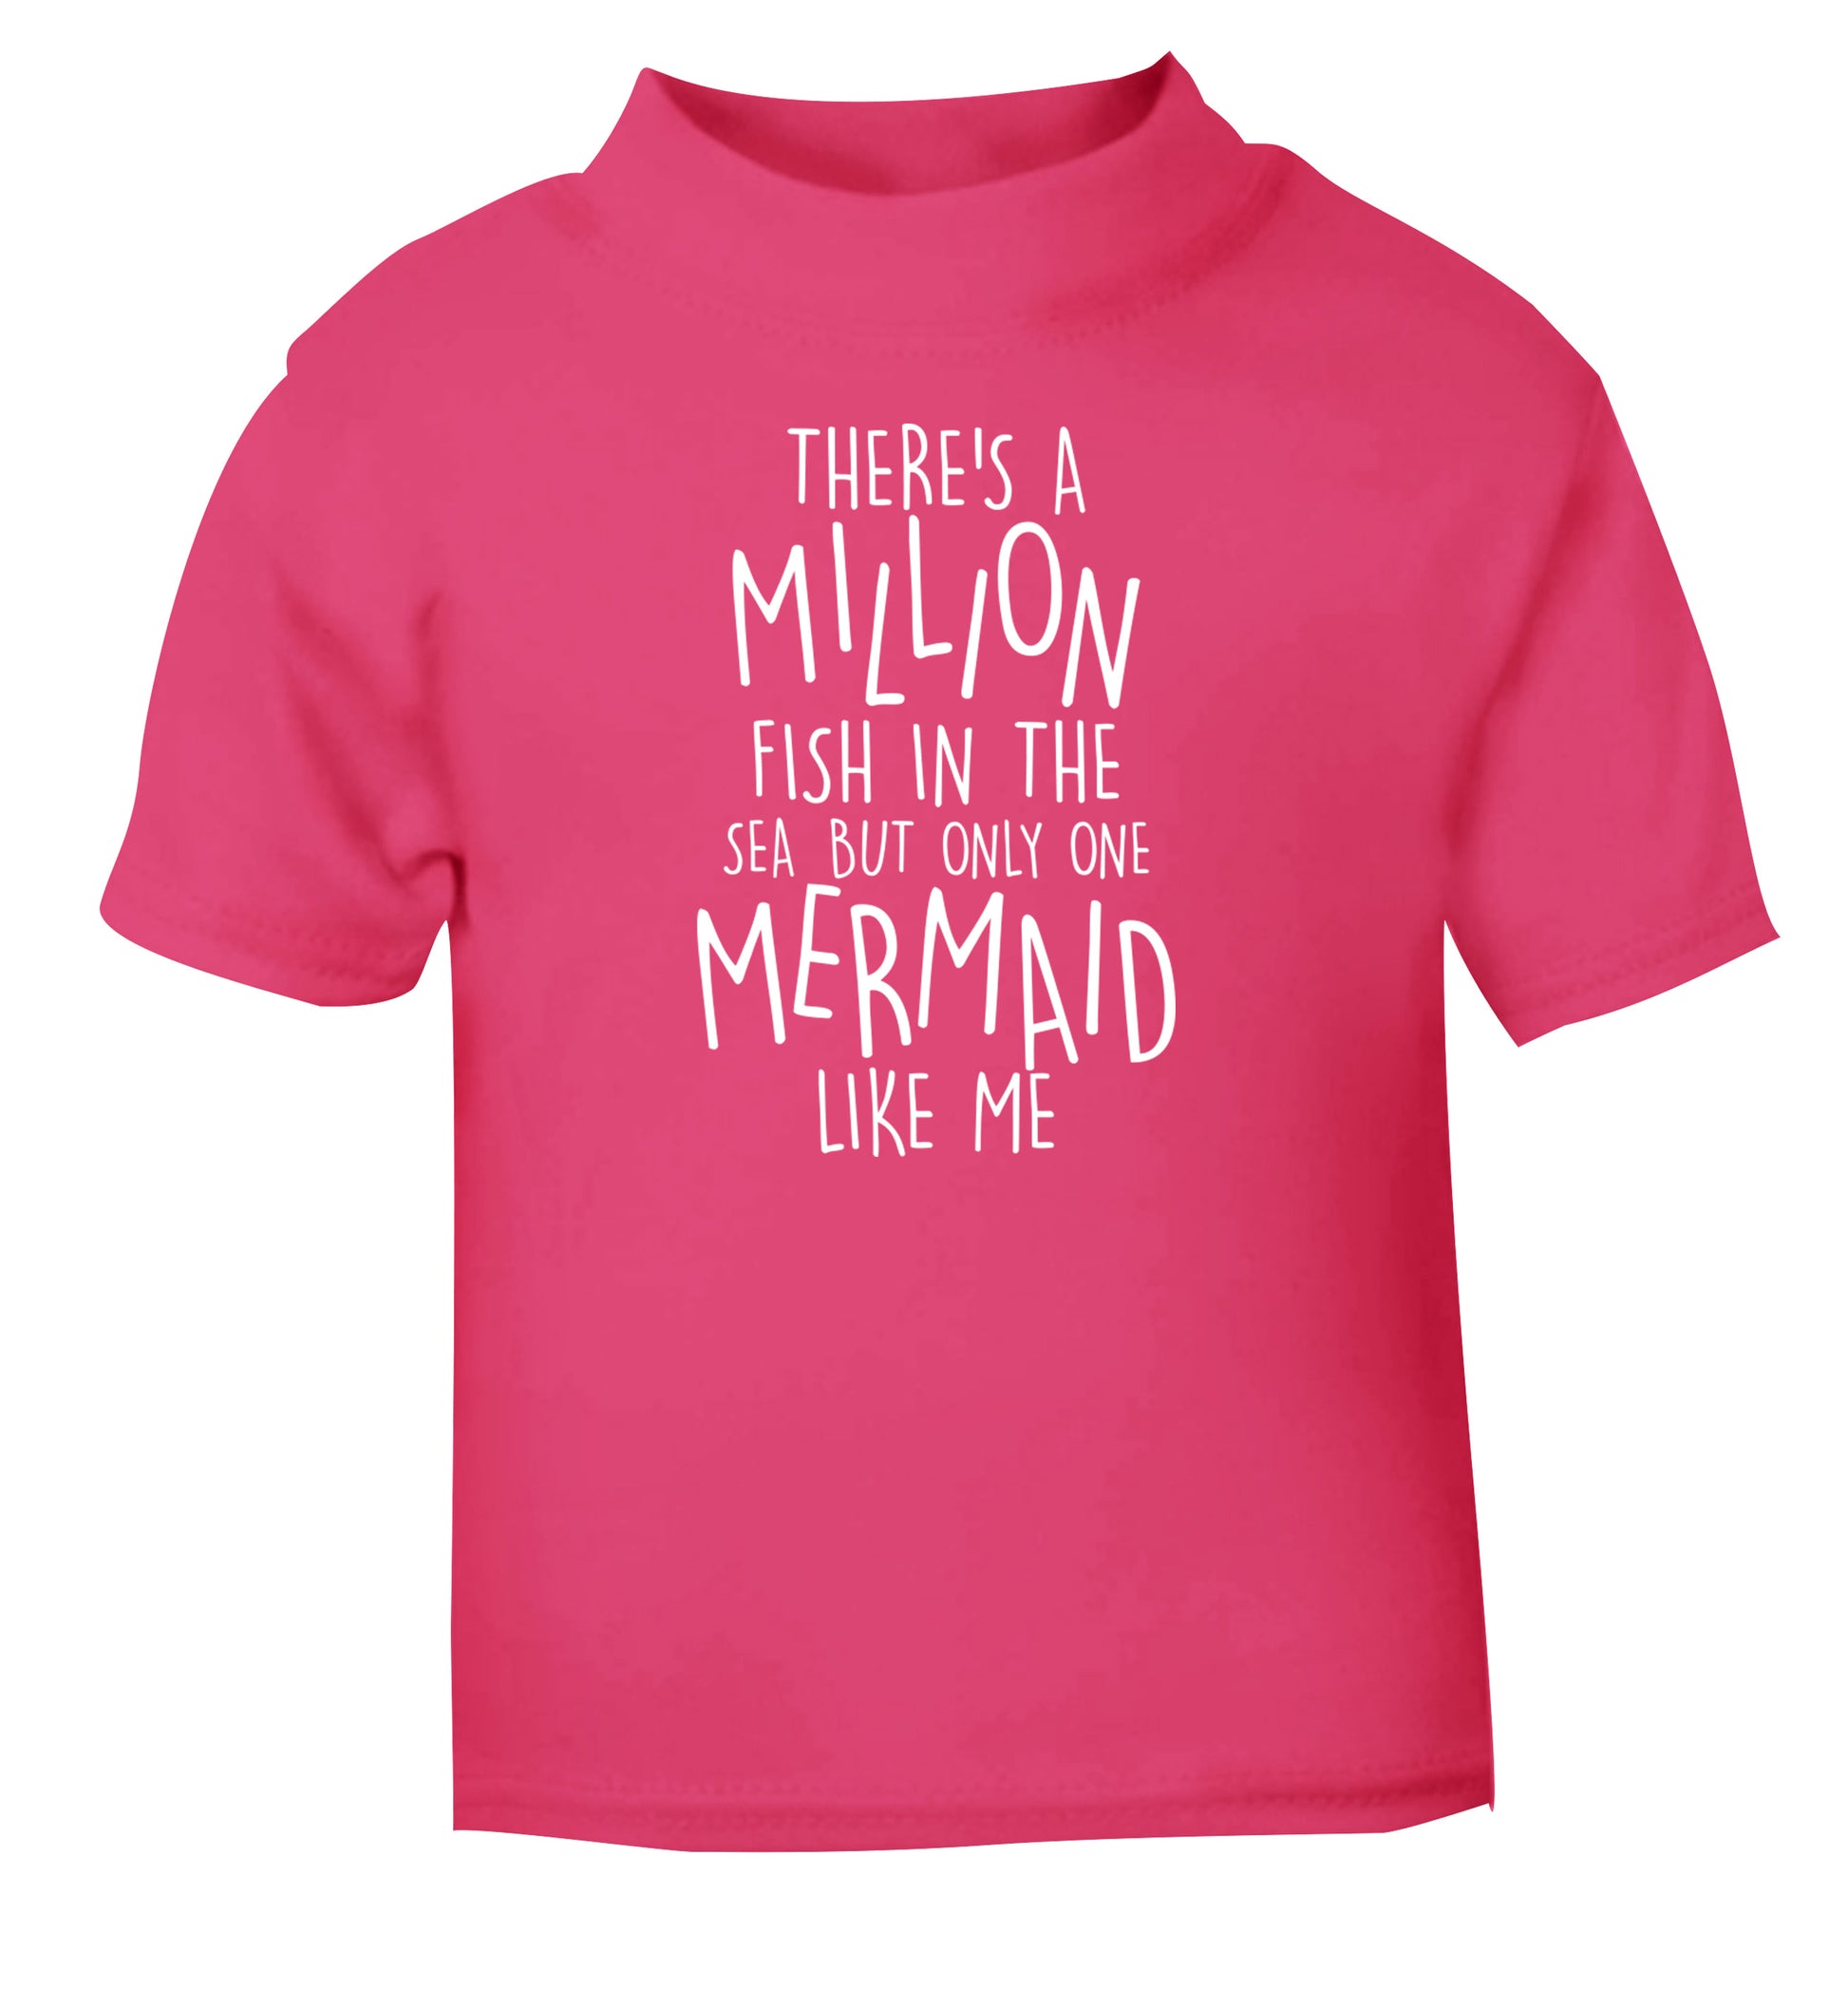 There's a million fish in the sea but only one mermaid like me pink Baby Toddler Tshirt 2 Years